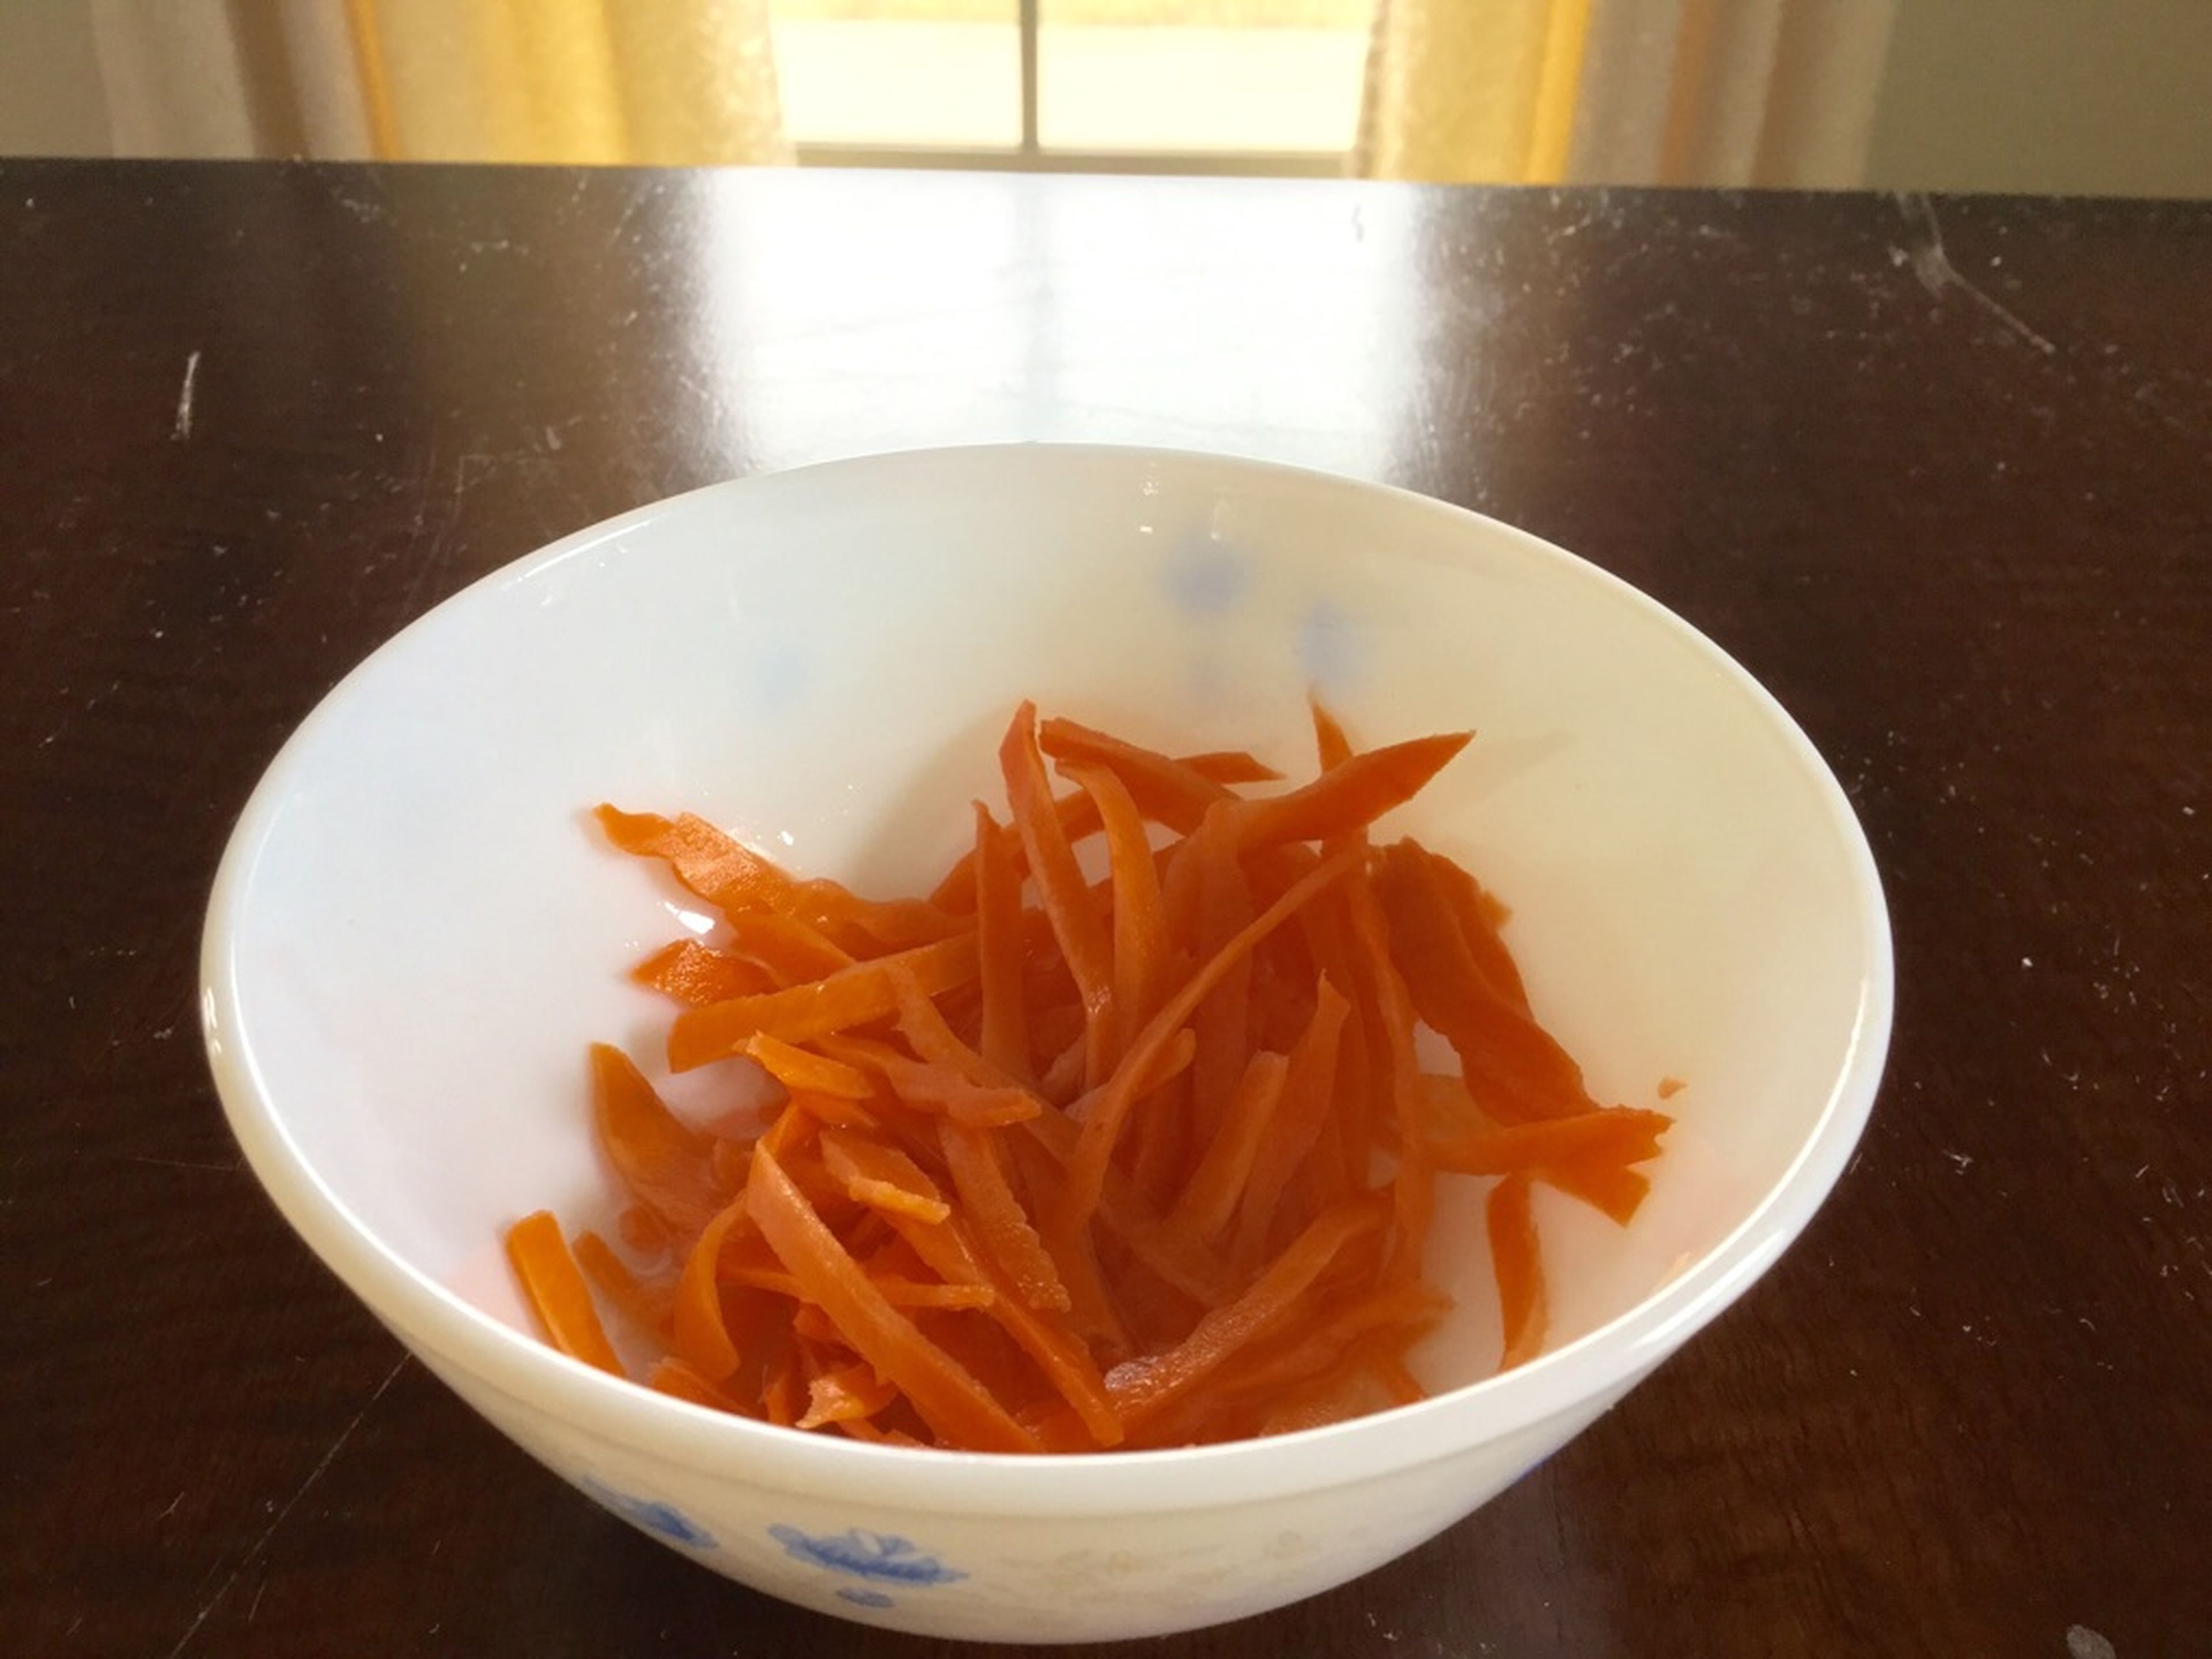 Julienne the carrot and add to a bowl. Add remaining sugar and lime juice. Toss to coat and set aside.